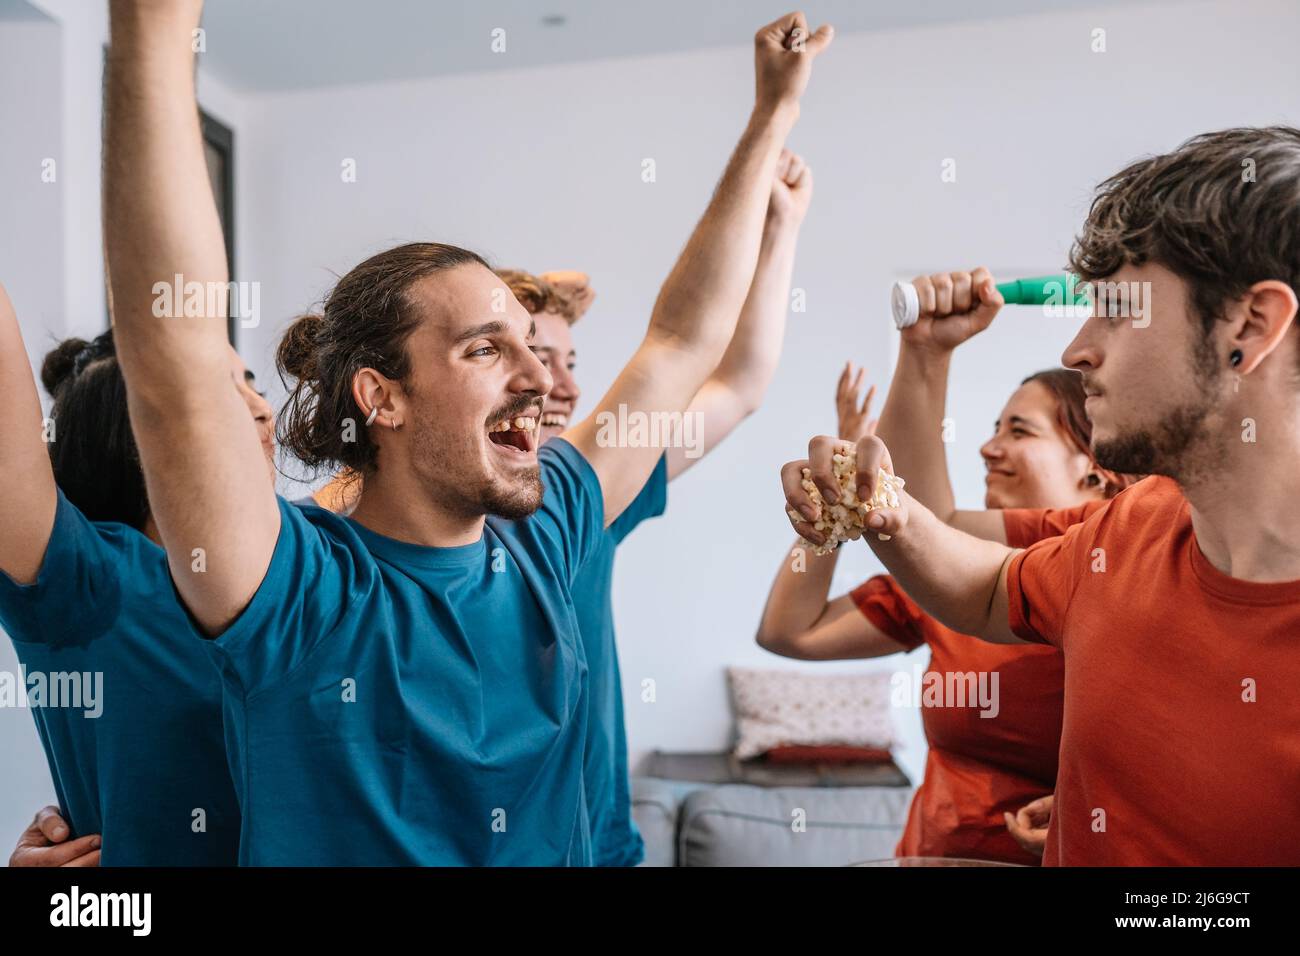 group of friends watching a sports championship on TV losing team throws popcorn at the winning team. leisure concept. Stock Photo